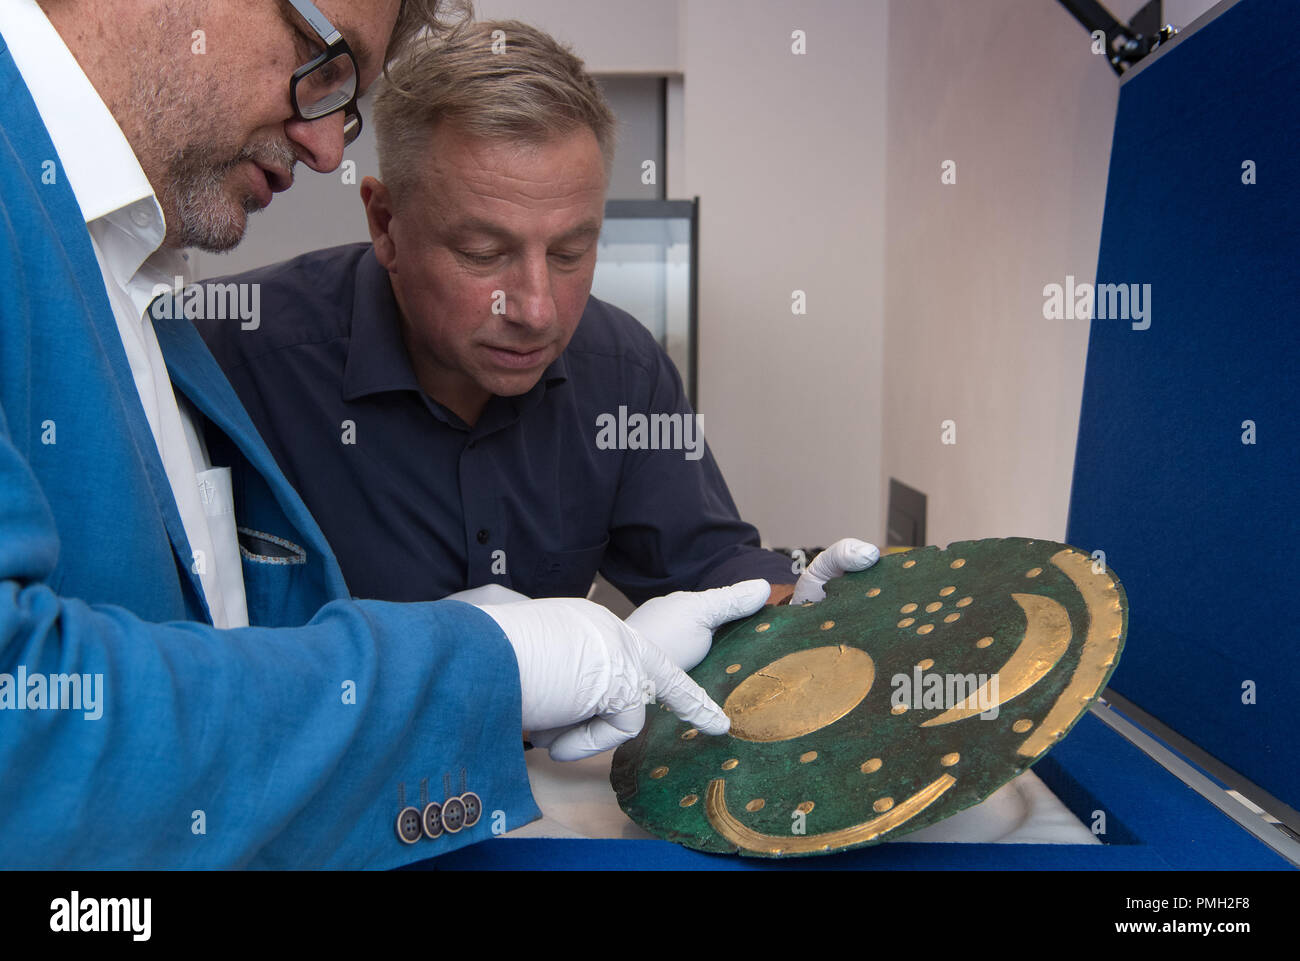 18 September 2018, Berlin: Harald Meller (l), Director of the State Office for the Preservation of Monuments and Archaeology in Saxony-Anhalt, and Matthias Wemhoff, Director of the Berlin Museum for Prehistory and Early History of the State Museums look at the Nebra Sky Disc in the Martin-Gropius-Bau. The Bronze Age disc will be on display from 21.09.2018 together with about 1000 archaeological finds in the exhibition 'Moving Times. Archaeology in Germany'. Photo: Soeren Stache/dpa Stock Photo